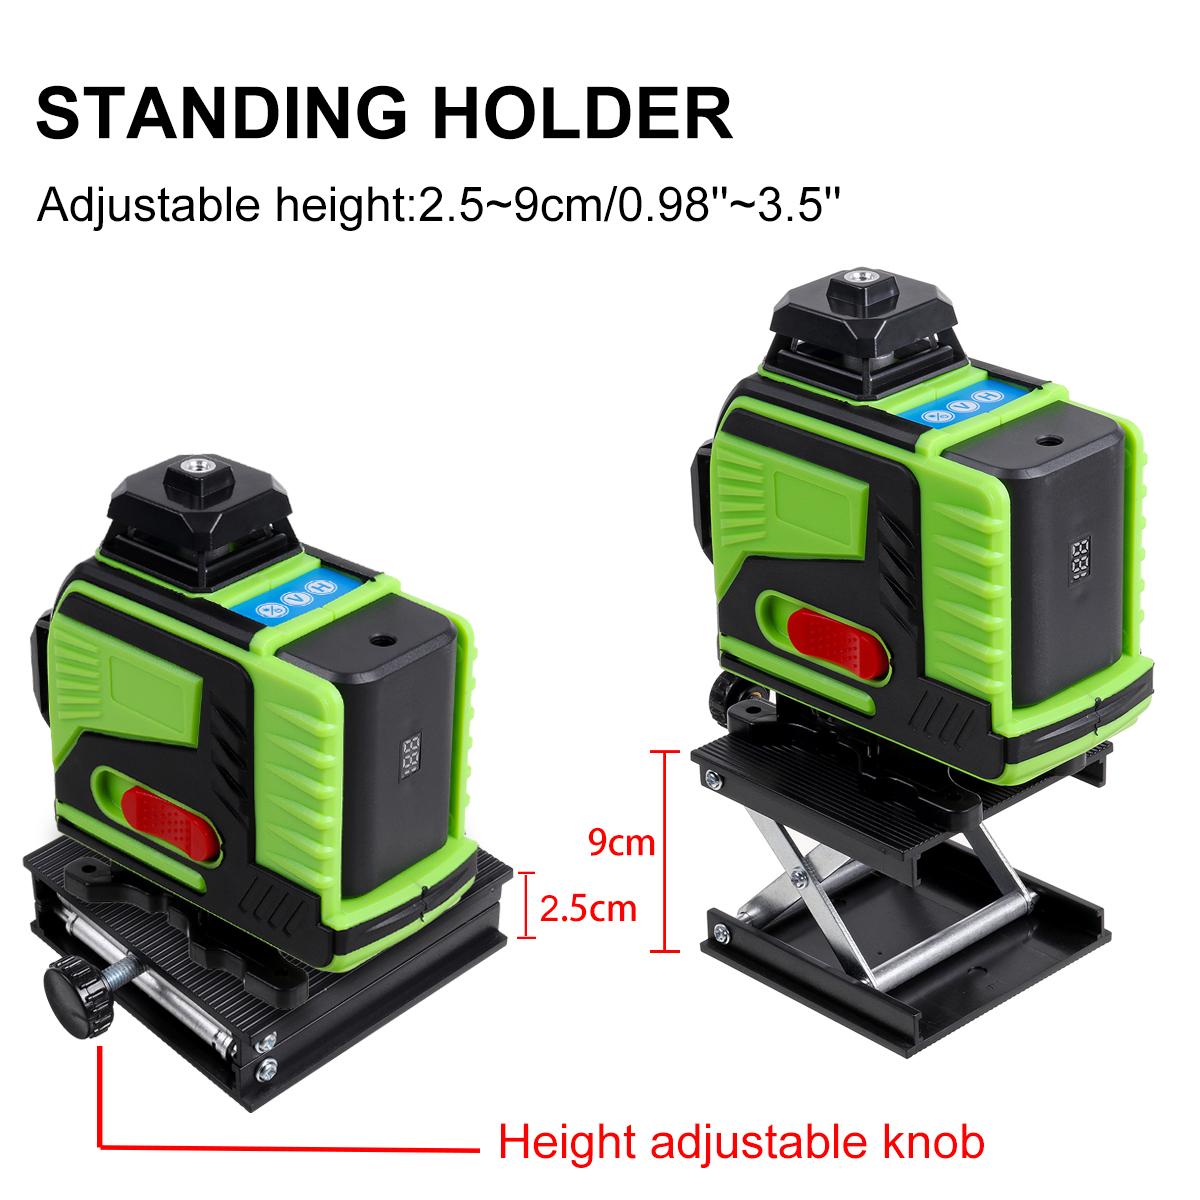 4D-16-Lines-Green-Light-Laser-Levels--360deg-Self-Rotary-Leveling-Measure-Tools-with-2PCS-Lithium-Ba-1941453-8